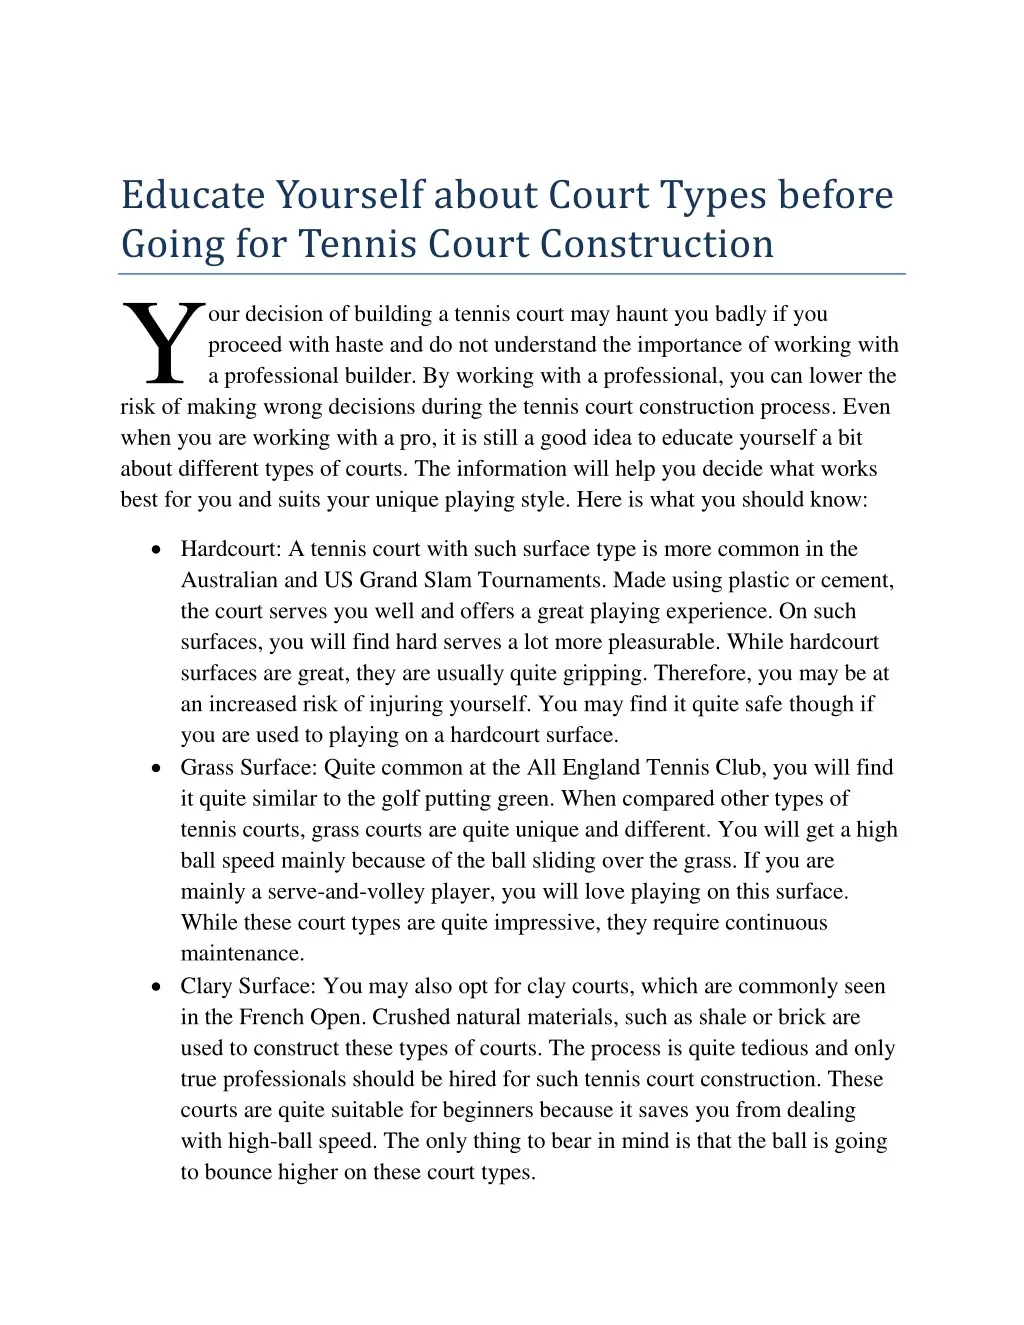 educate yourself about court types before going